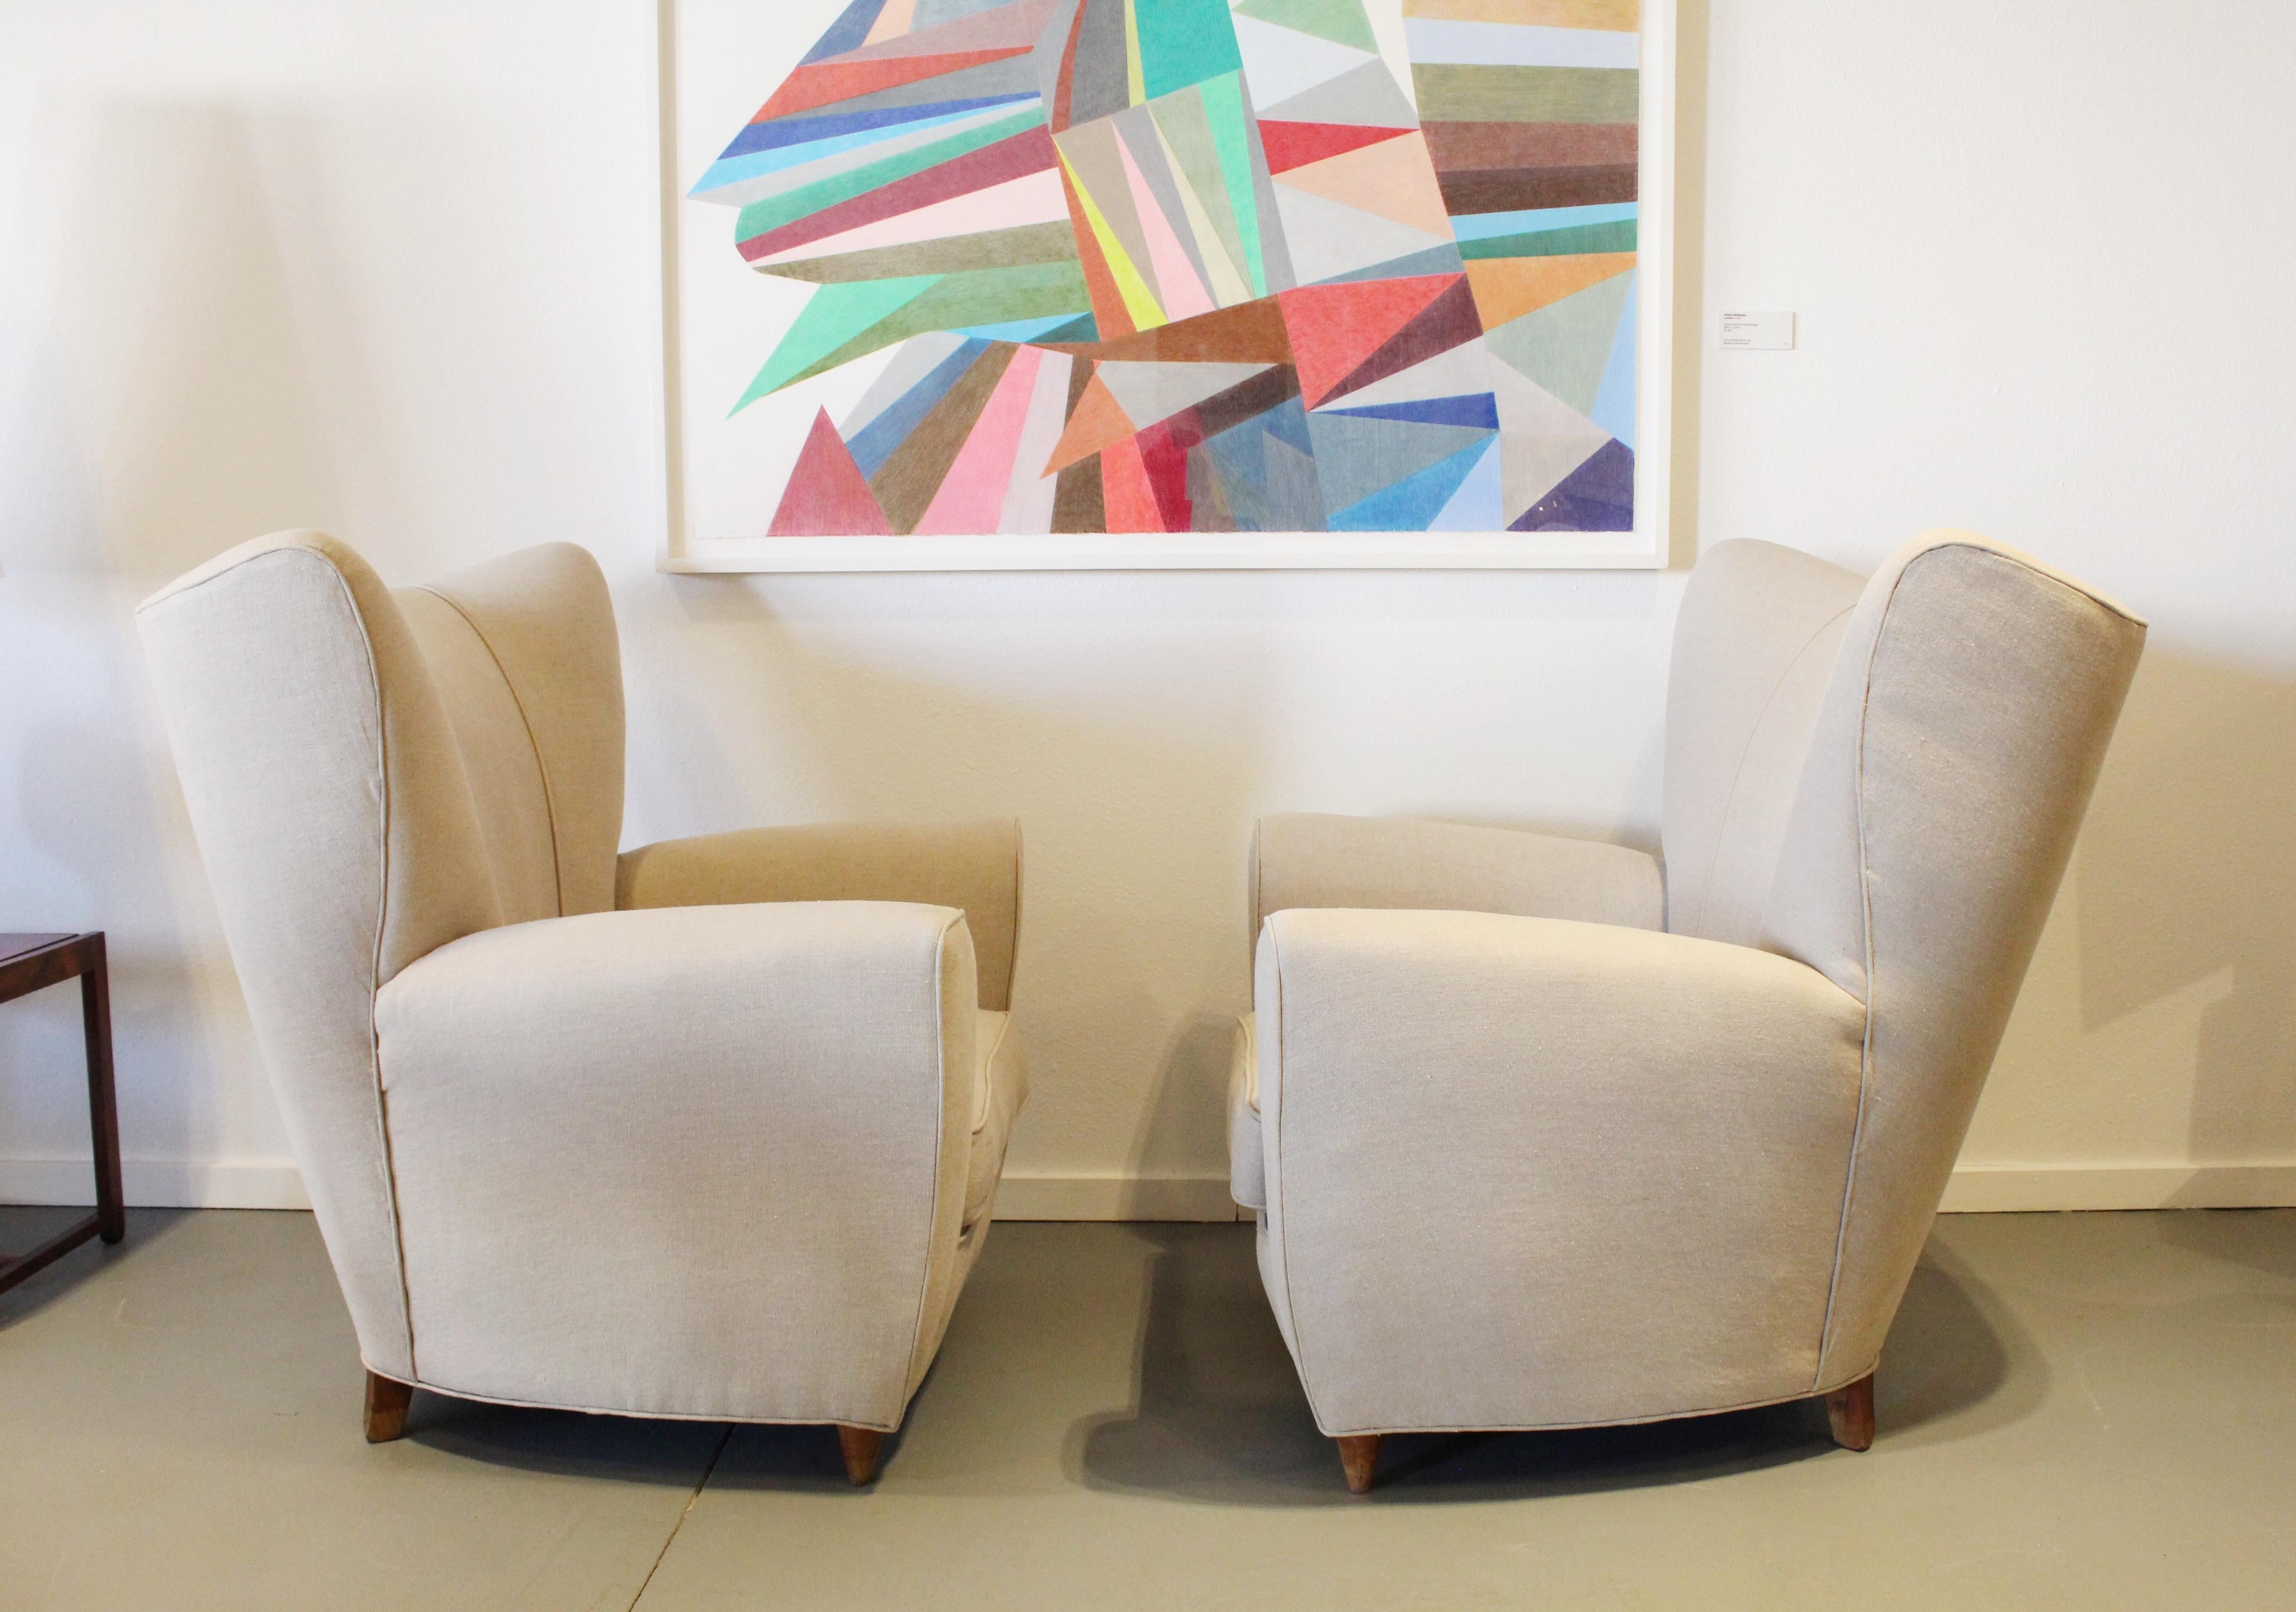 Gorgeous early 1950s Italian Mid-Century Modern Wingback chairs upholstered in a an incredible stone linen. Chairs have patina on the wooden feet and have been left as is which are beautiful. Chairs are reminiscent of Gio Ponti, Guglielmo Ulrich and